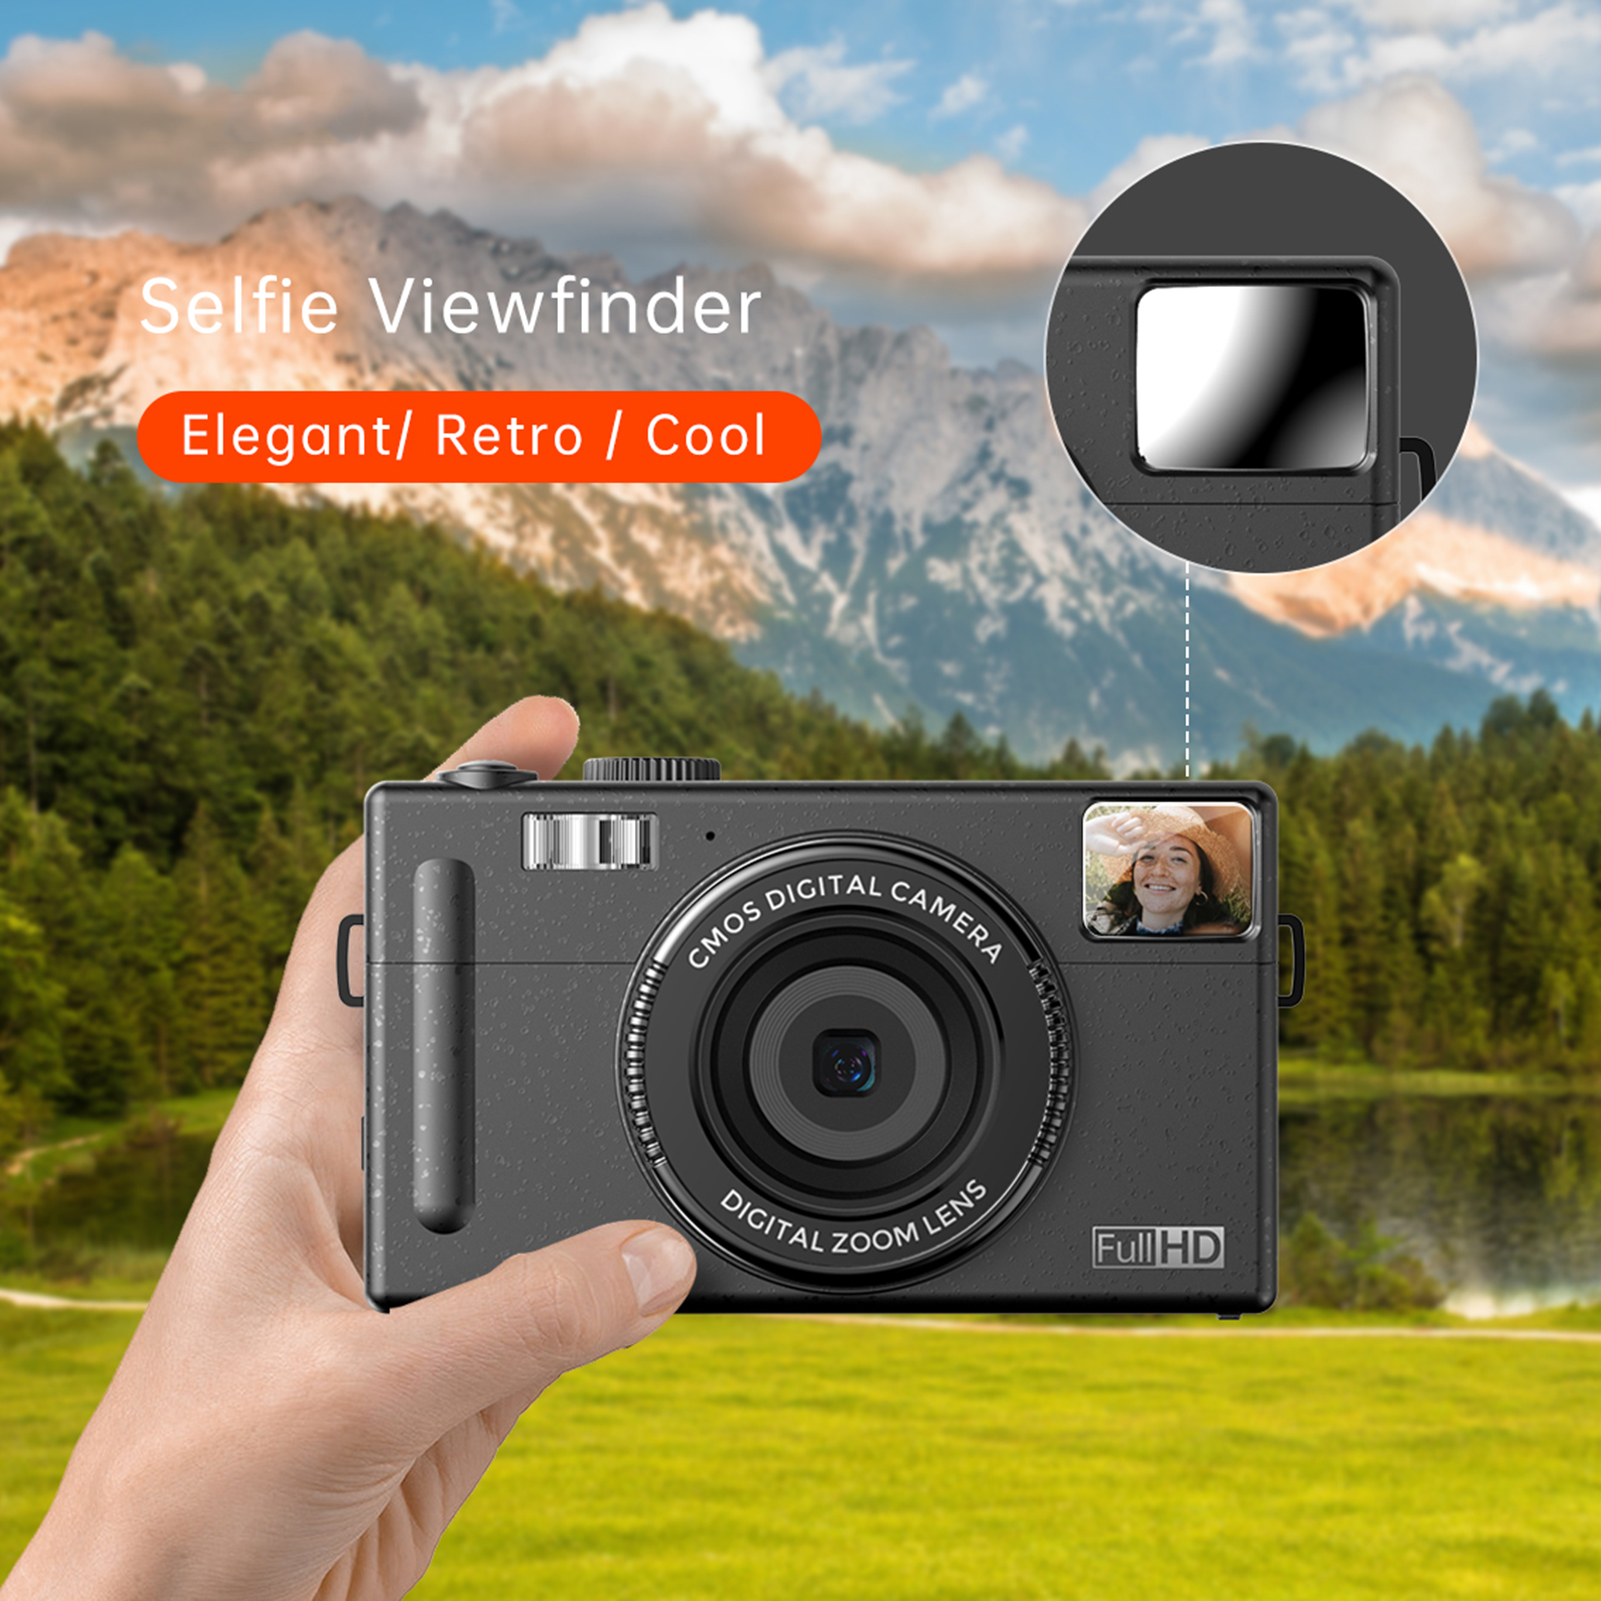 Andoer 1080P Compact Digital Camera Video Camcorder 48MP 3.0 Inch TFT LCD Screen Auto Focus 16X Digital Zoom -shake Face Detect Smile Capture Beauty Face Built-in Flash Battery Selfie Mirror - image 5 of 7